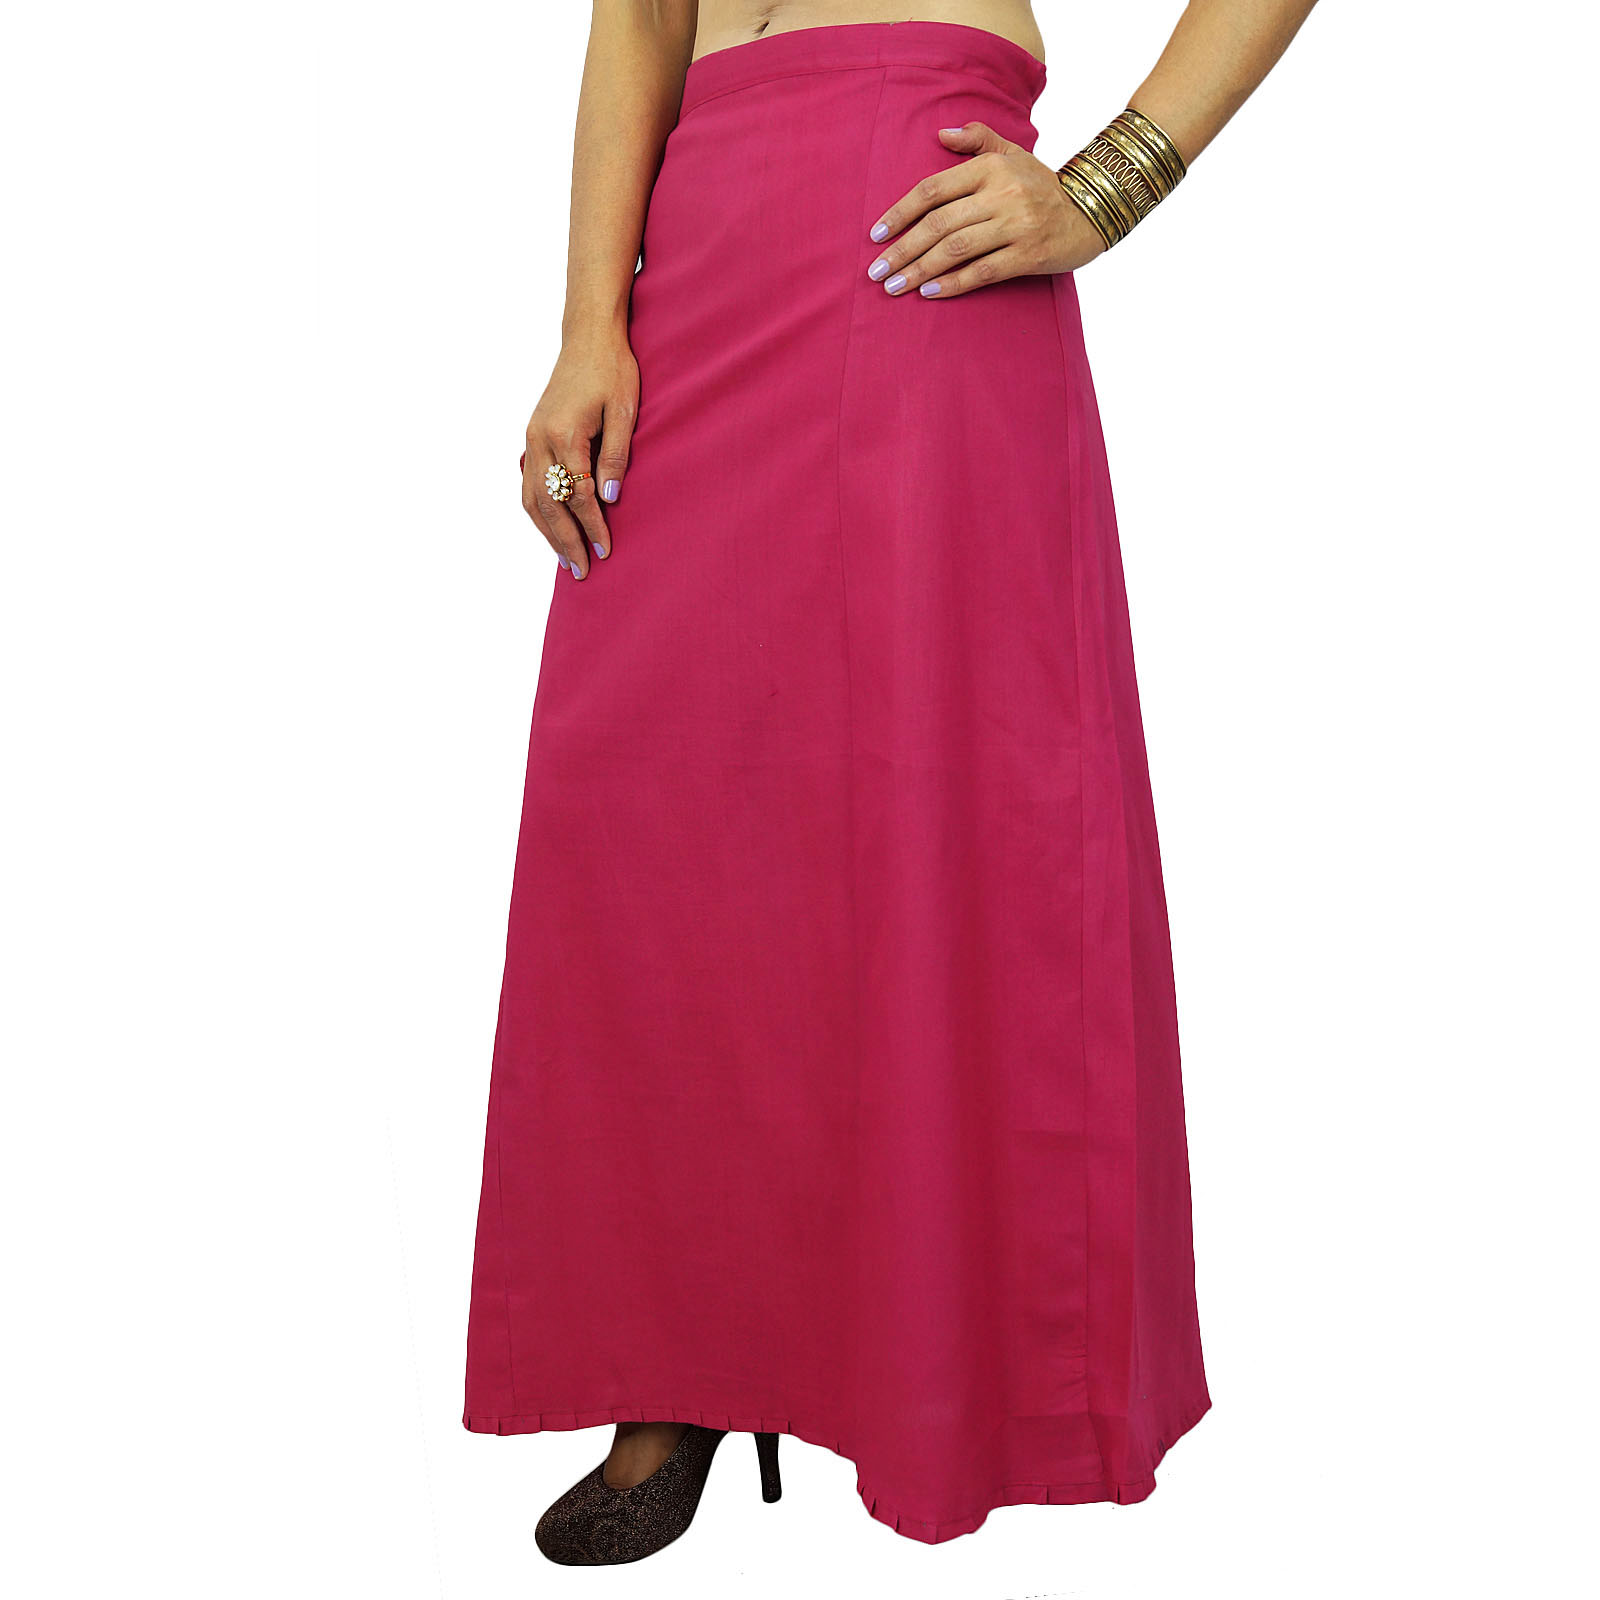 Inskirt Lining For Sari Ethnic Indian Ready-made Solid Cotton Petticoat ...